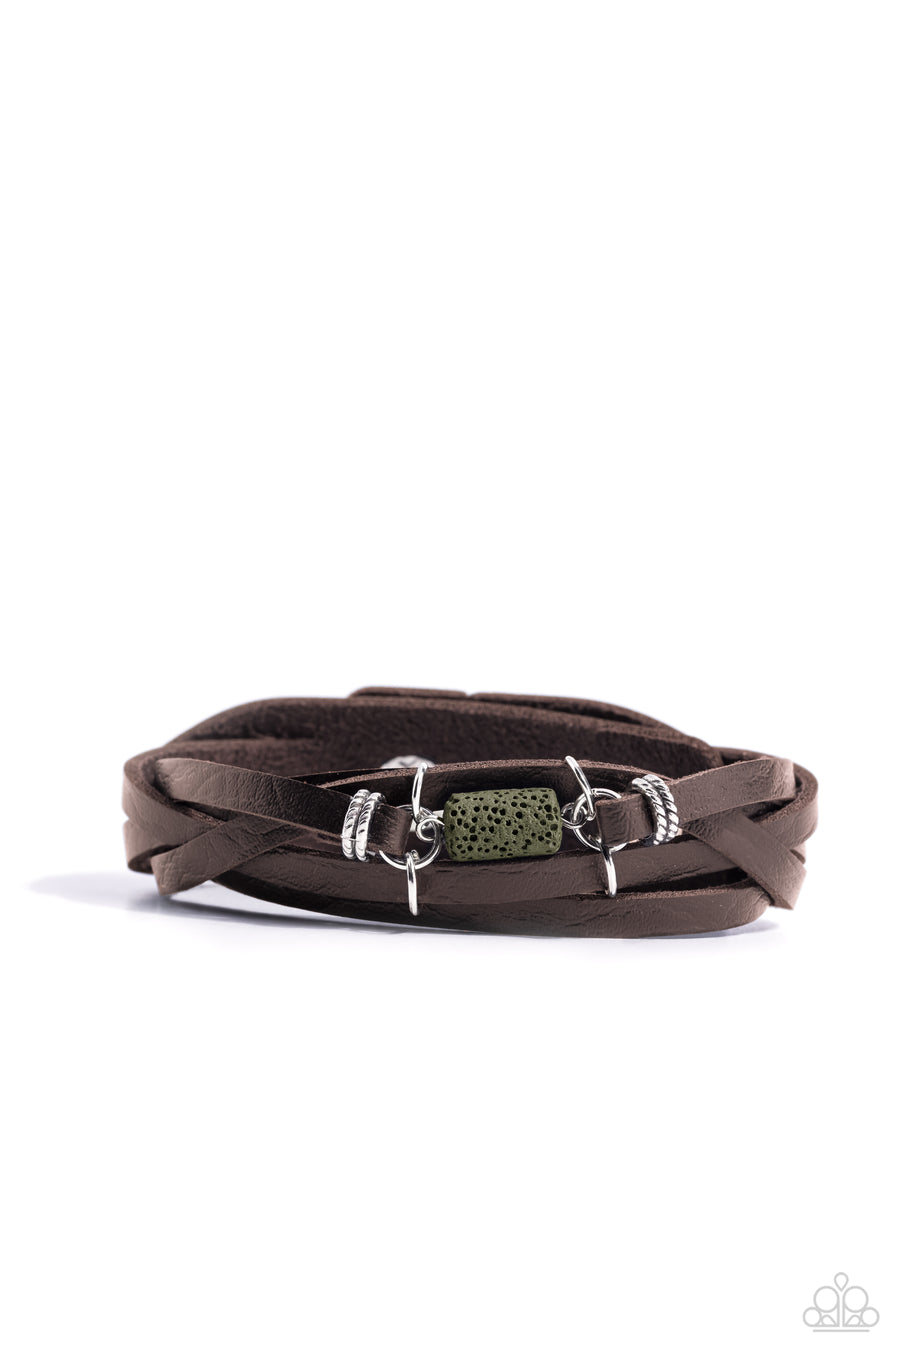 Metamorphic Monument - Green Bracelet - Paparazzi Accessories - Held together by textured and smooth silver rings, braided brown leather strands are adorned with an Olive Branch lava rock centerpiece for an earthy finish.